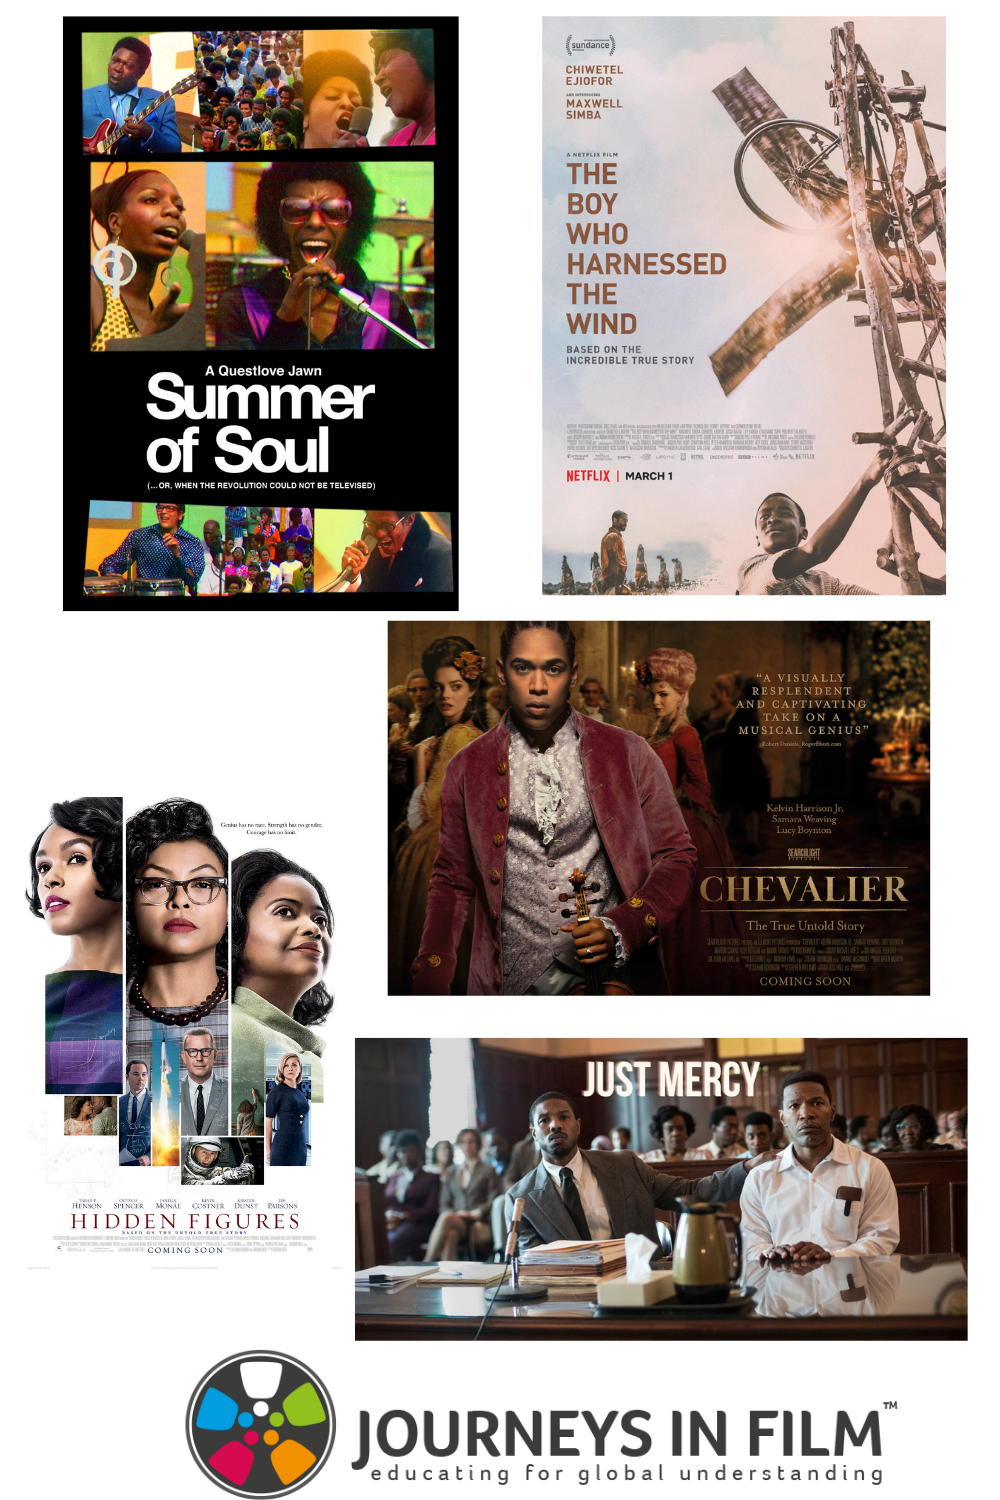 White background with various movie posters on it: Summer of Soul, The Boy Who Harnessed the Wind, Chevalier, Hidden Figures and Justice Mercy. Journeys in Film logo at the bottom. 